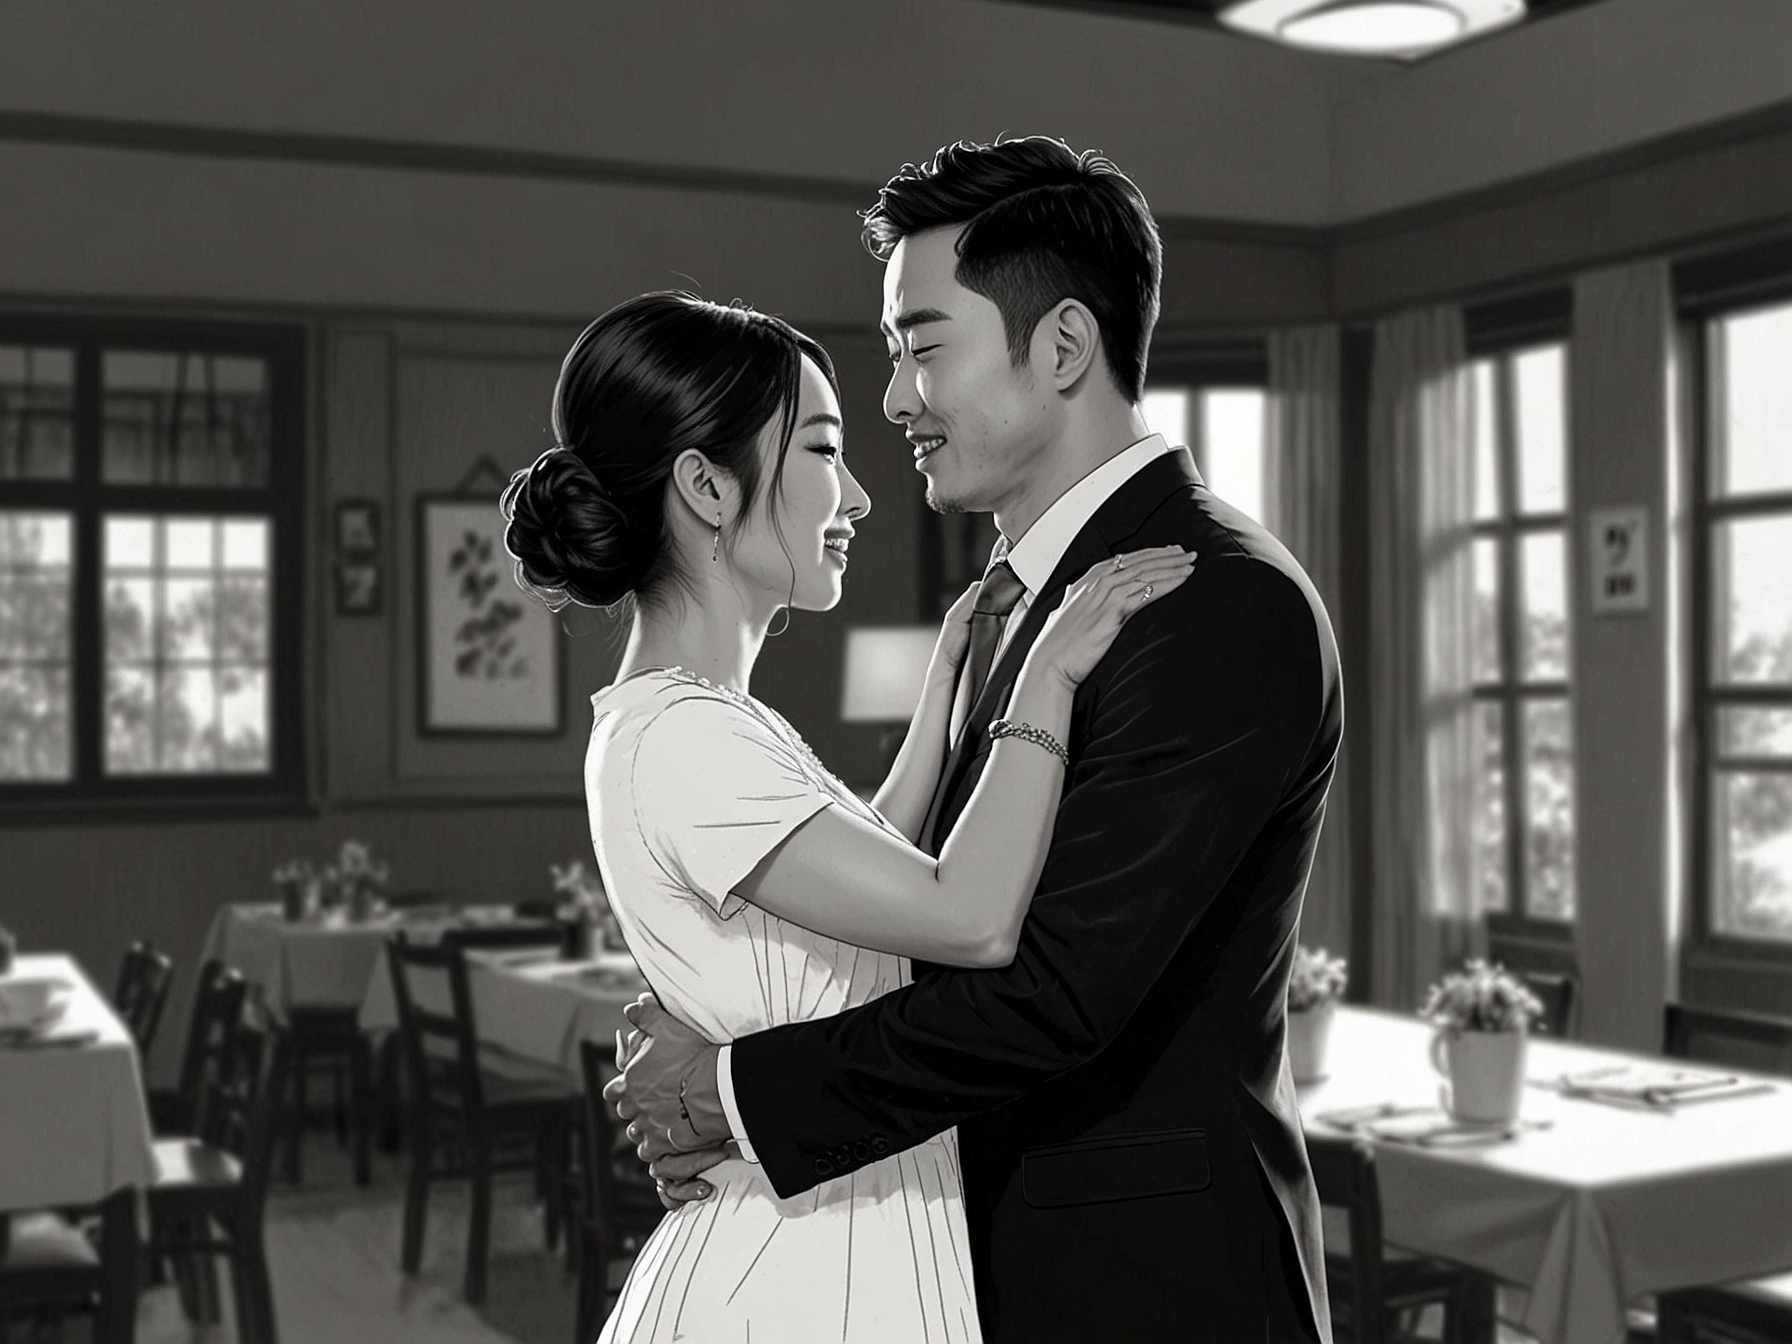 Min-Suk and Ji-Eun embrace each other joyously at their engagement party. This couple's journey through ups and downs has culminated in a beautiful proposal, showcasing their resilient love story.